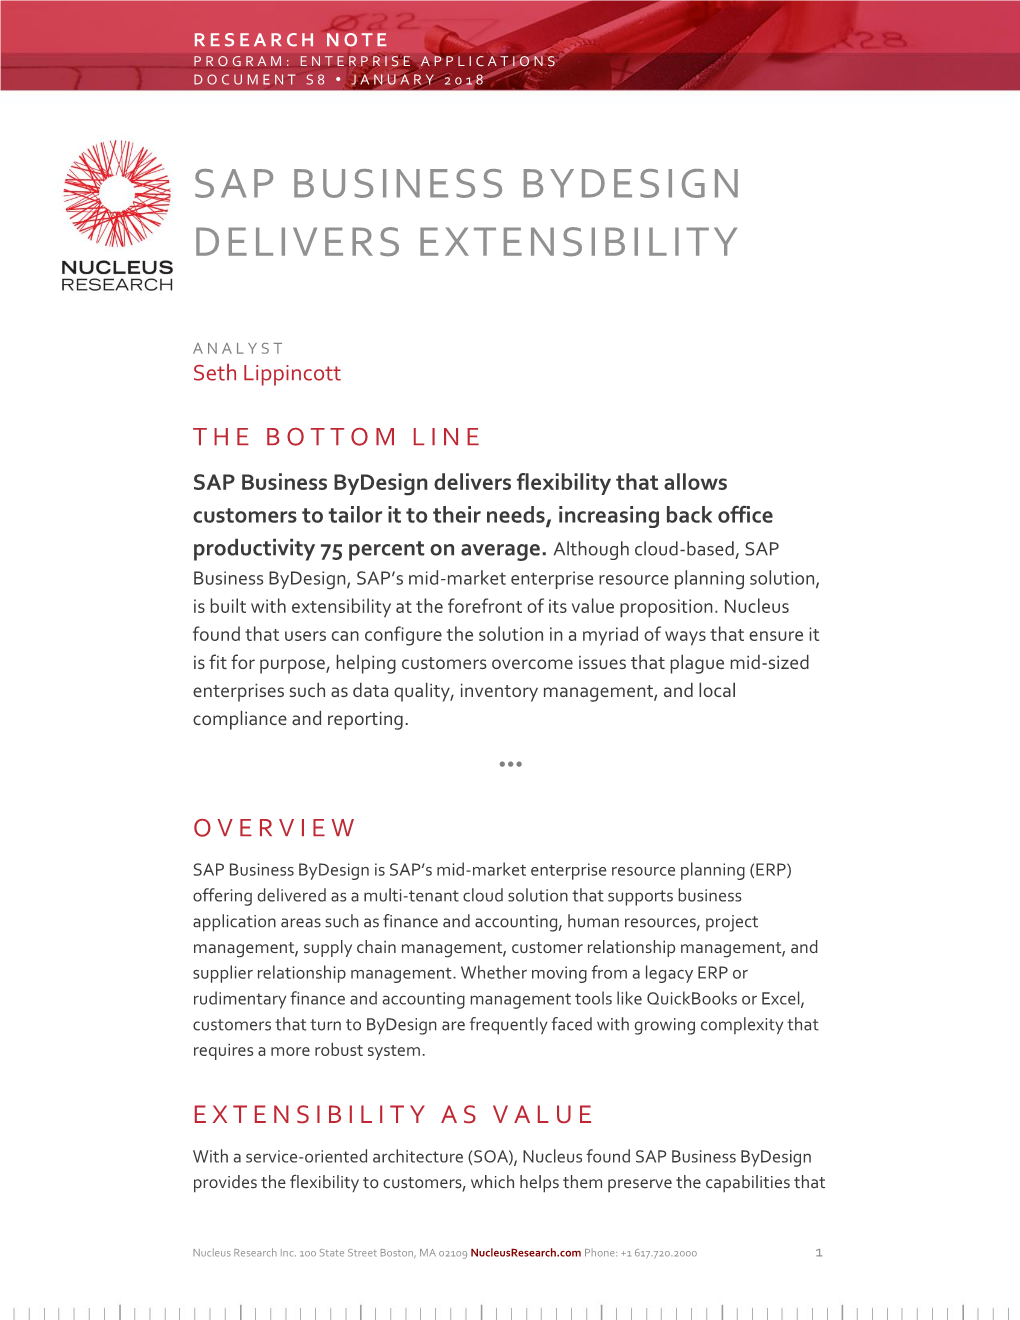 Sap Business Bydesign Delivers Extensibility